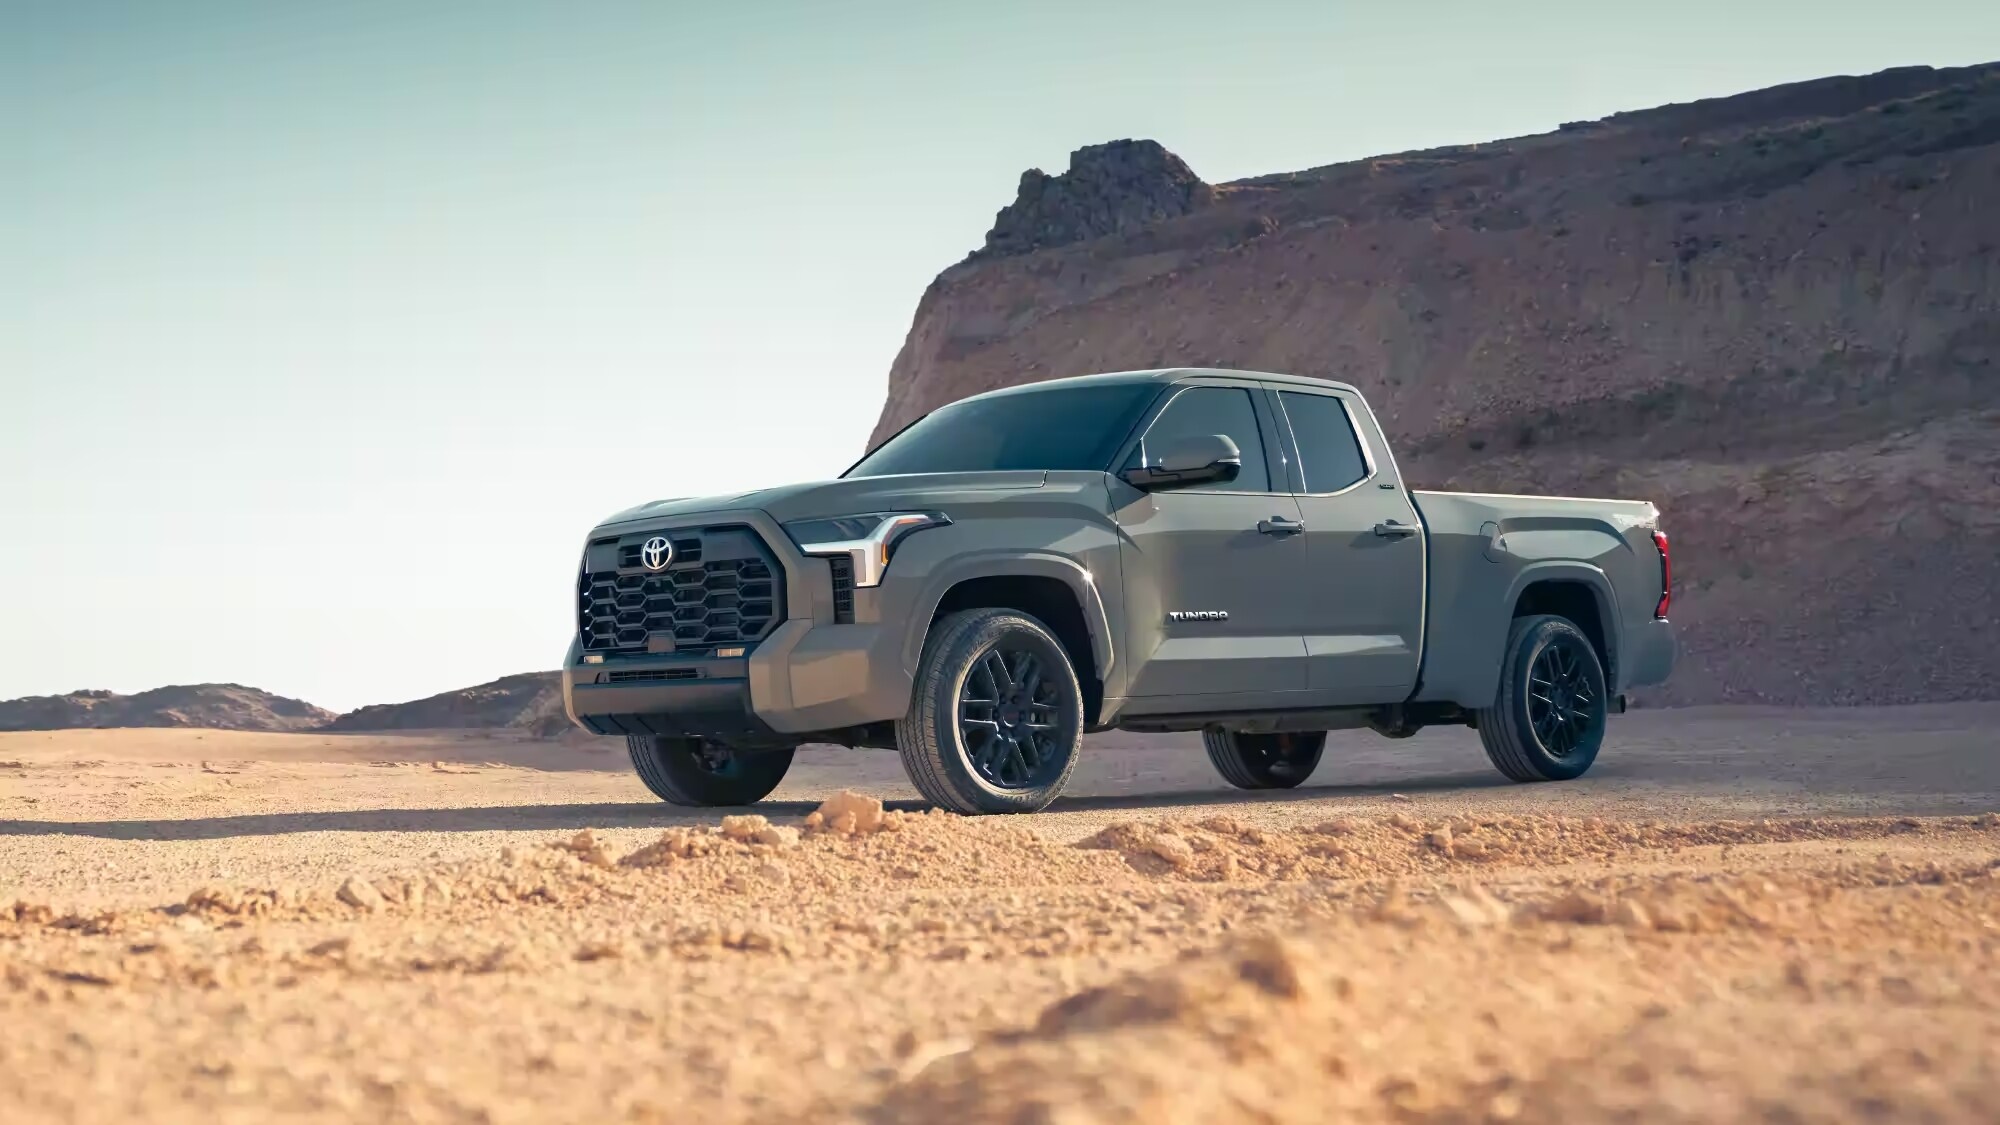 Silver Toyota Tundra parked in the desert with a mountain face in the background